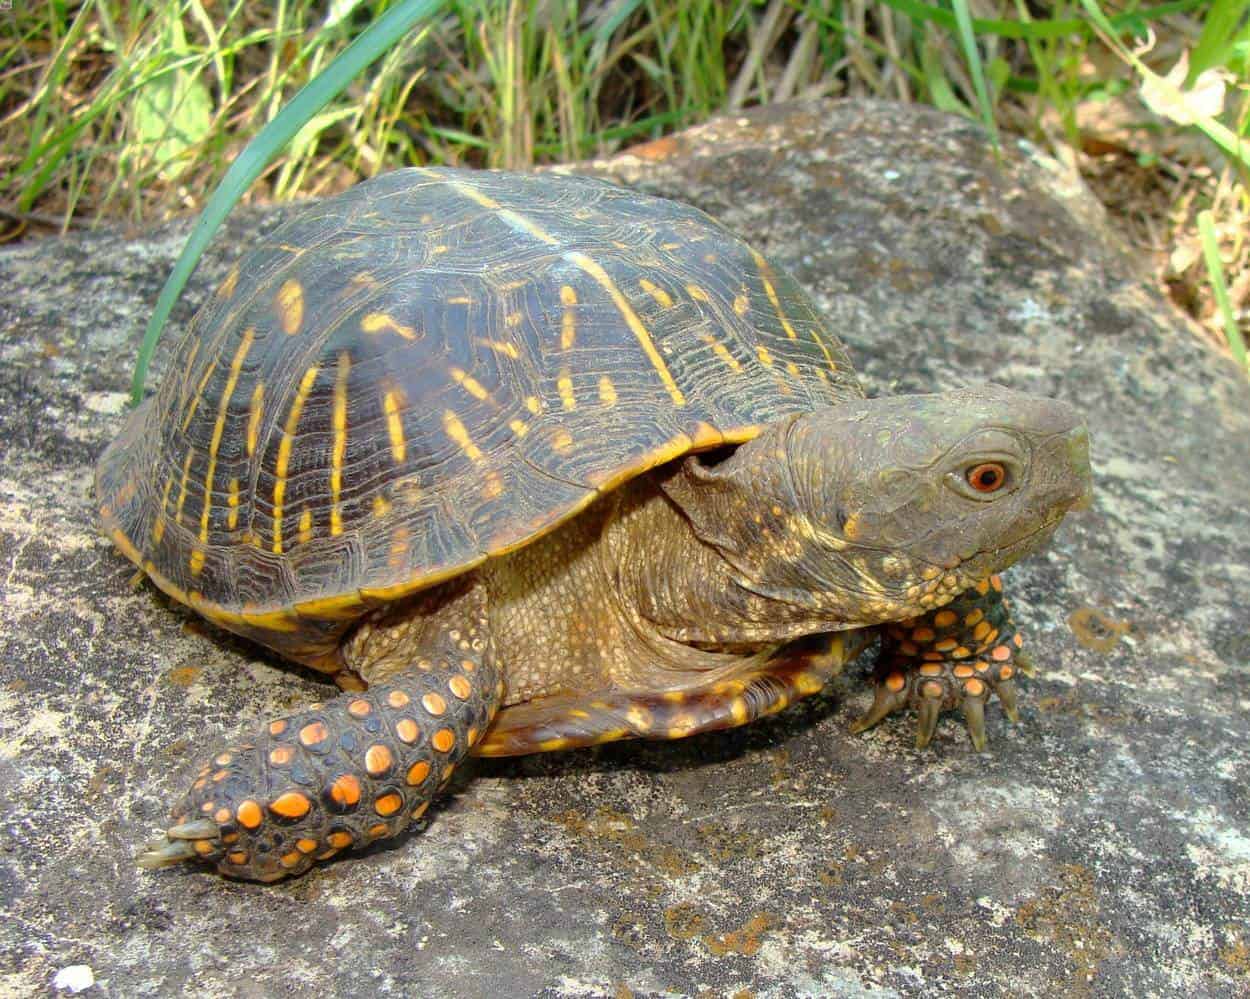 An ornate box turtle in an outdoor enclosure